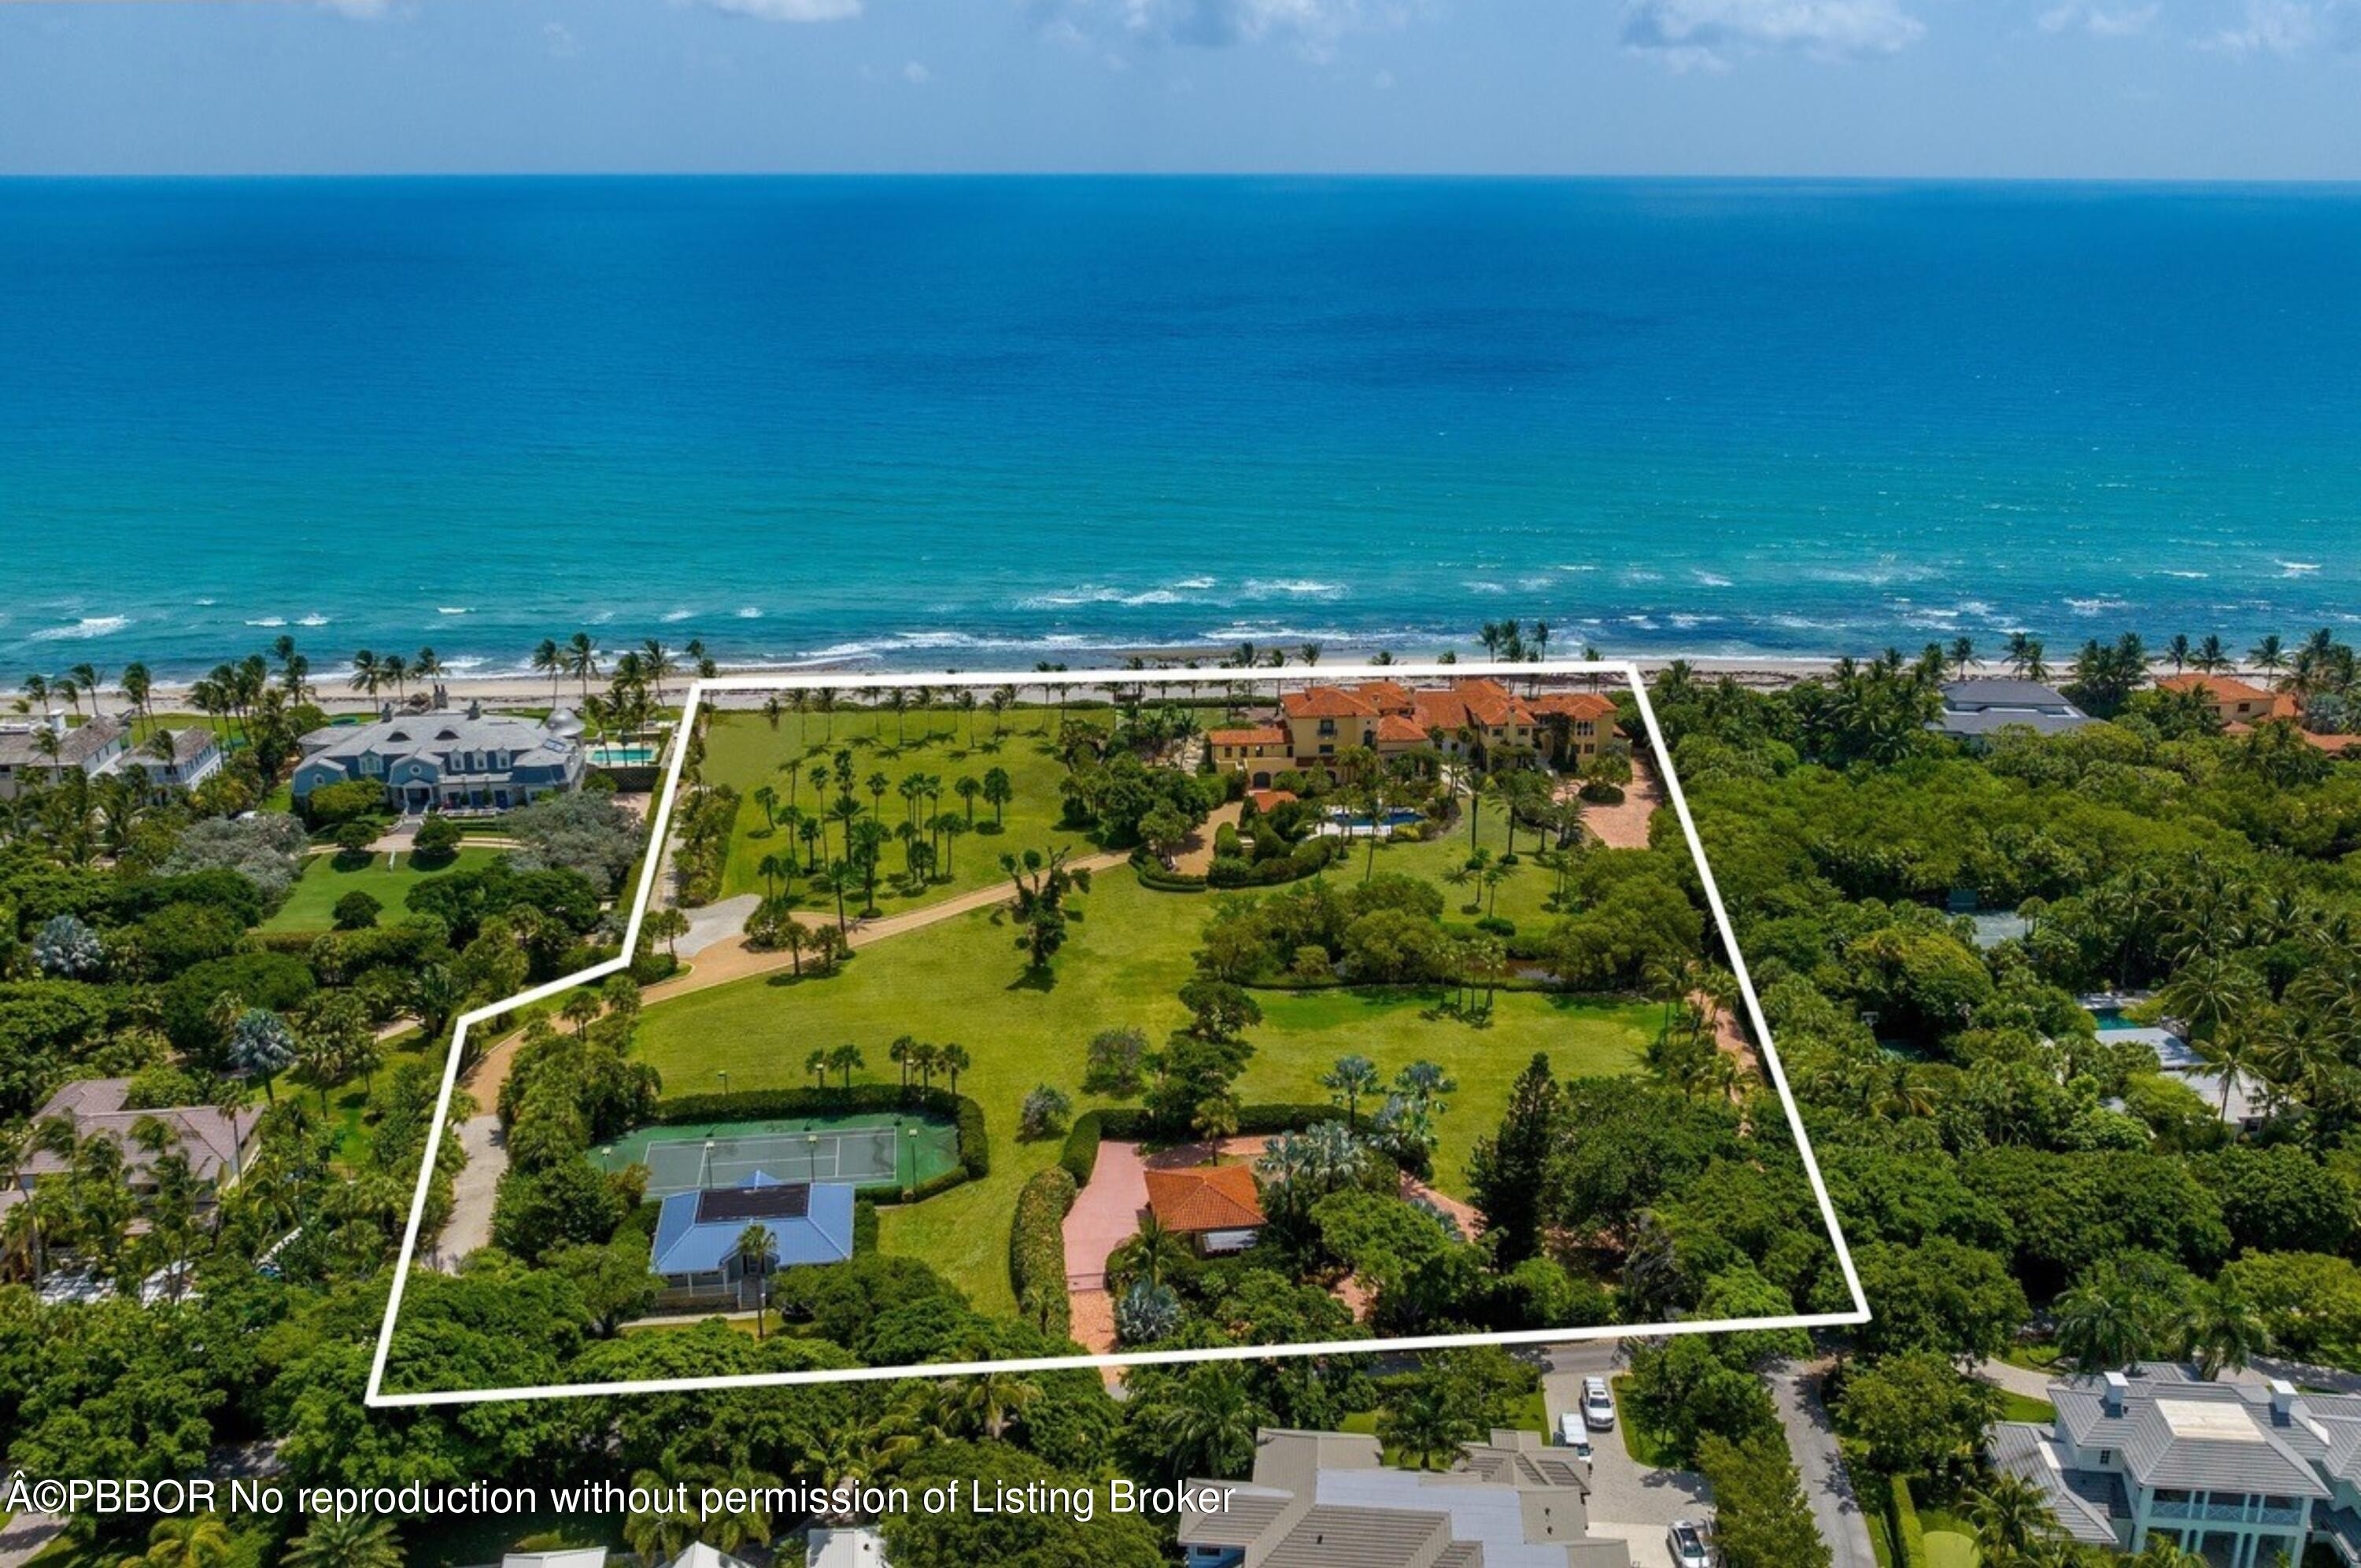 Single Family Home for Sale at Old Port Village, North Palm Beach, FL 33408